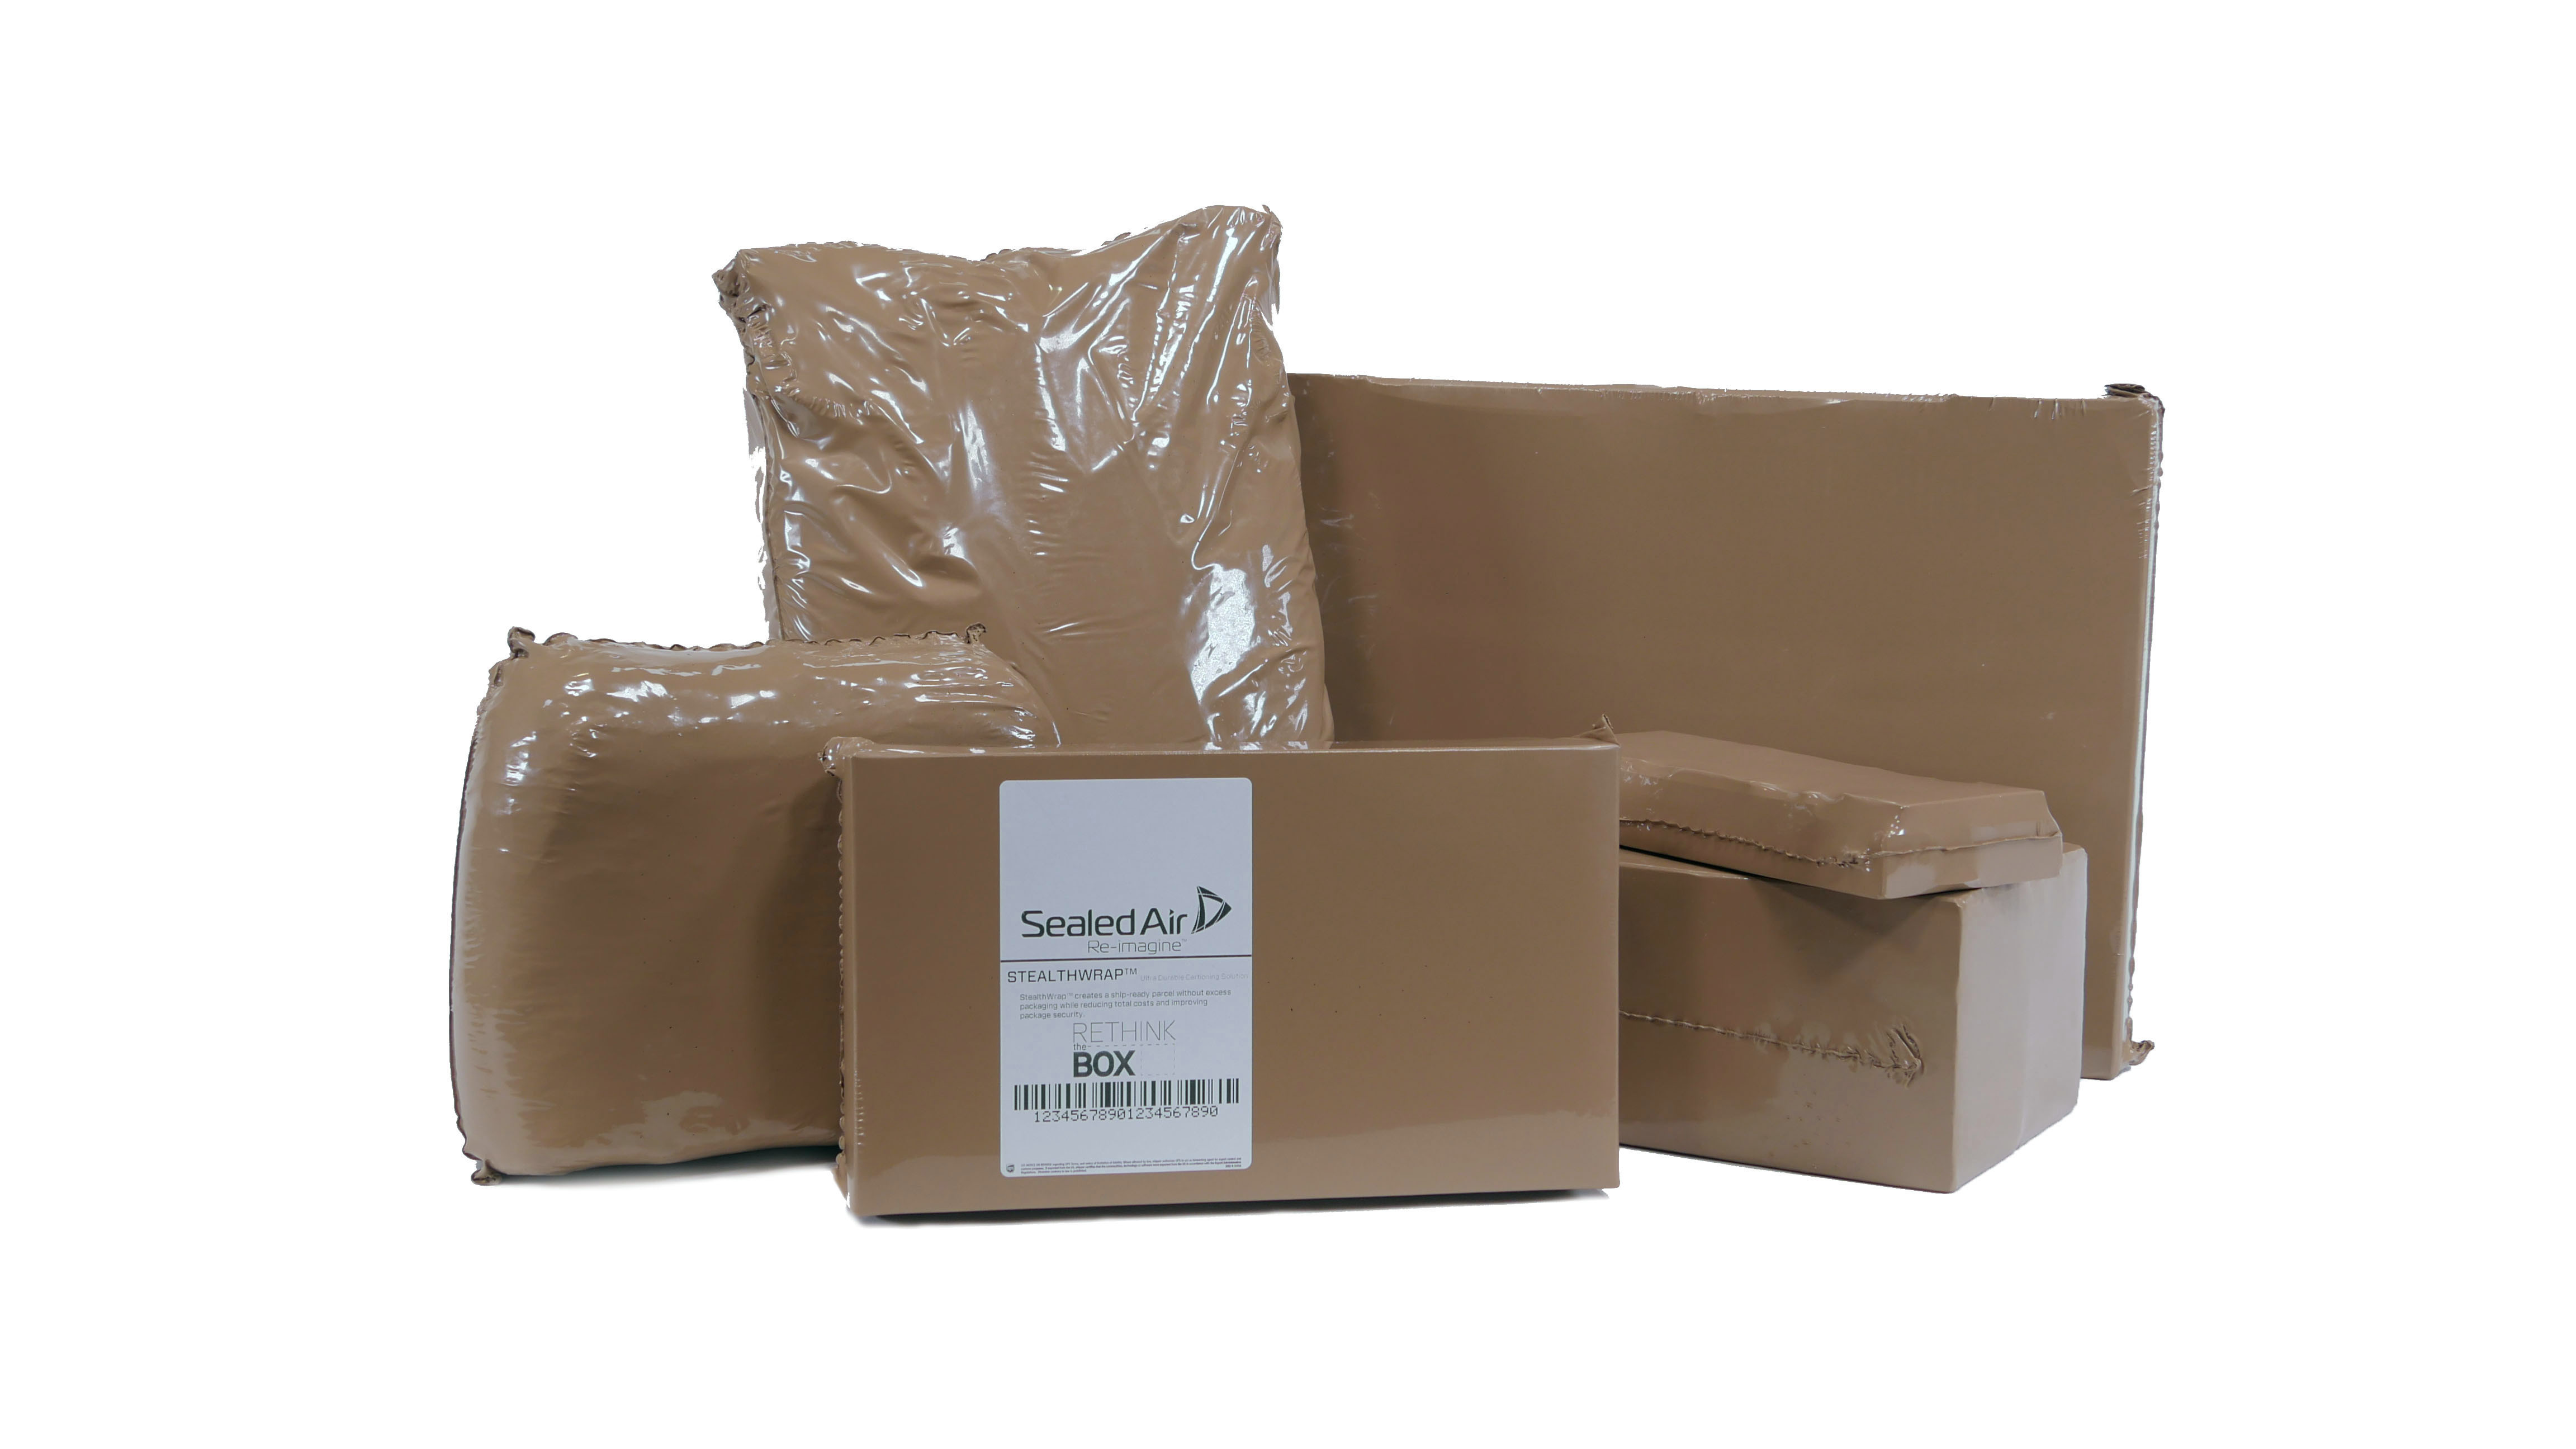 sealed air s stealthwrap solution wins packaging innovation award business wire syringe blister